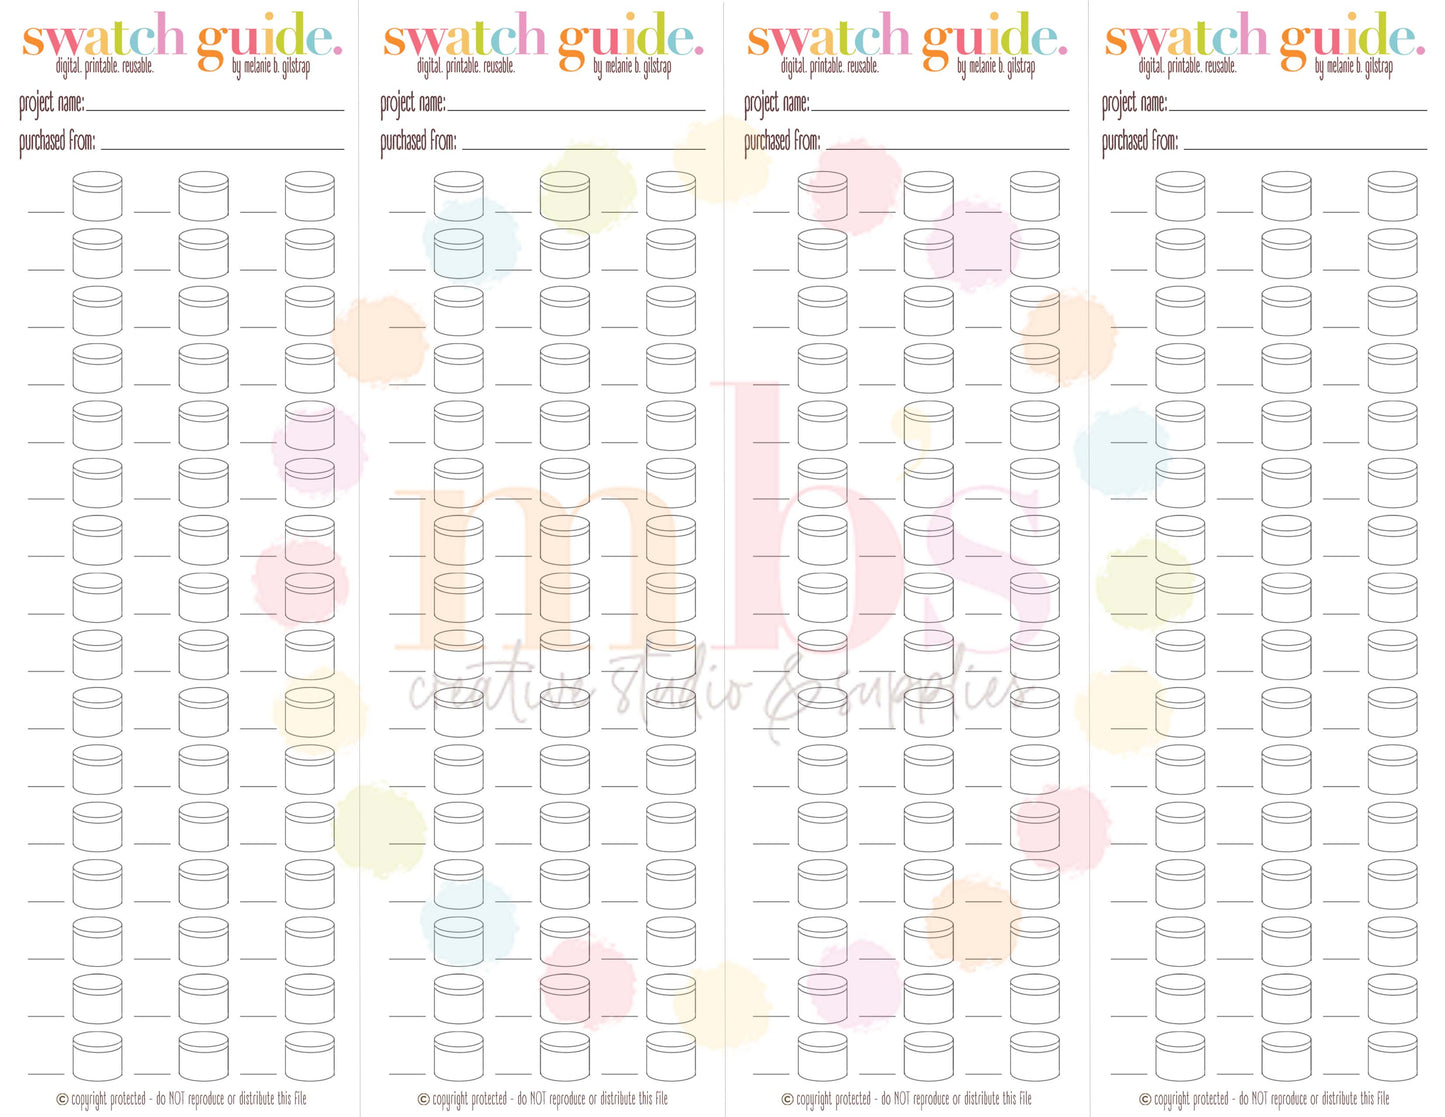 MB's Digital Downloadable & Printable Guide for PBN: SWATCH GUIDE for 48 PAINTS